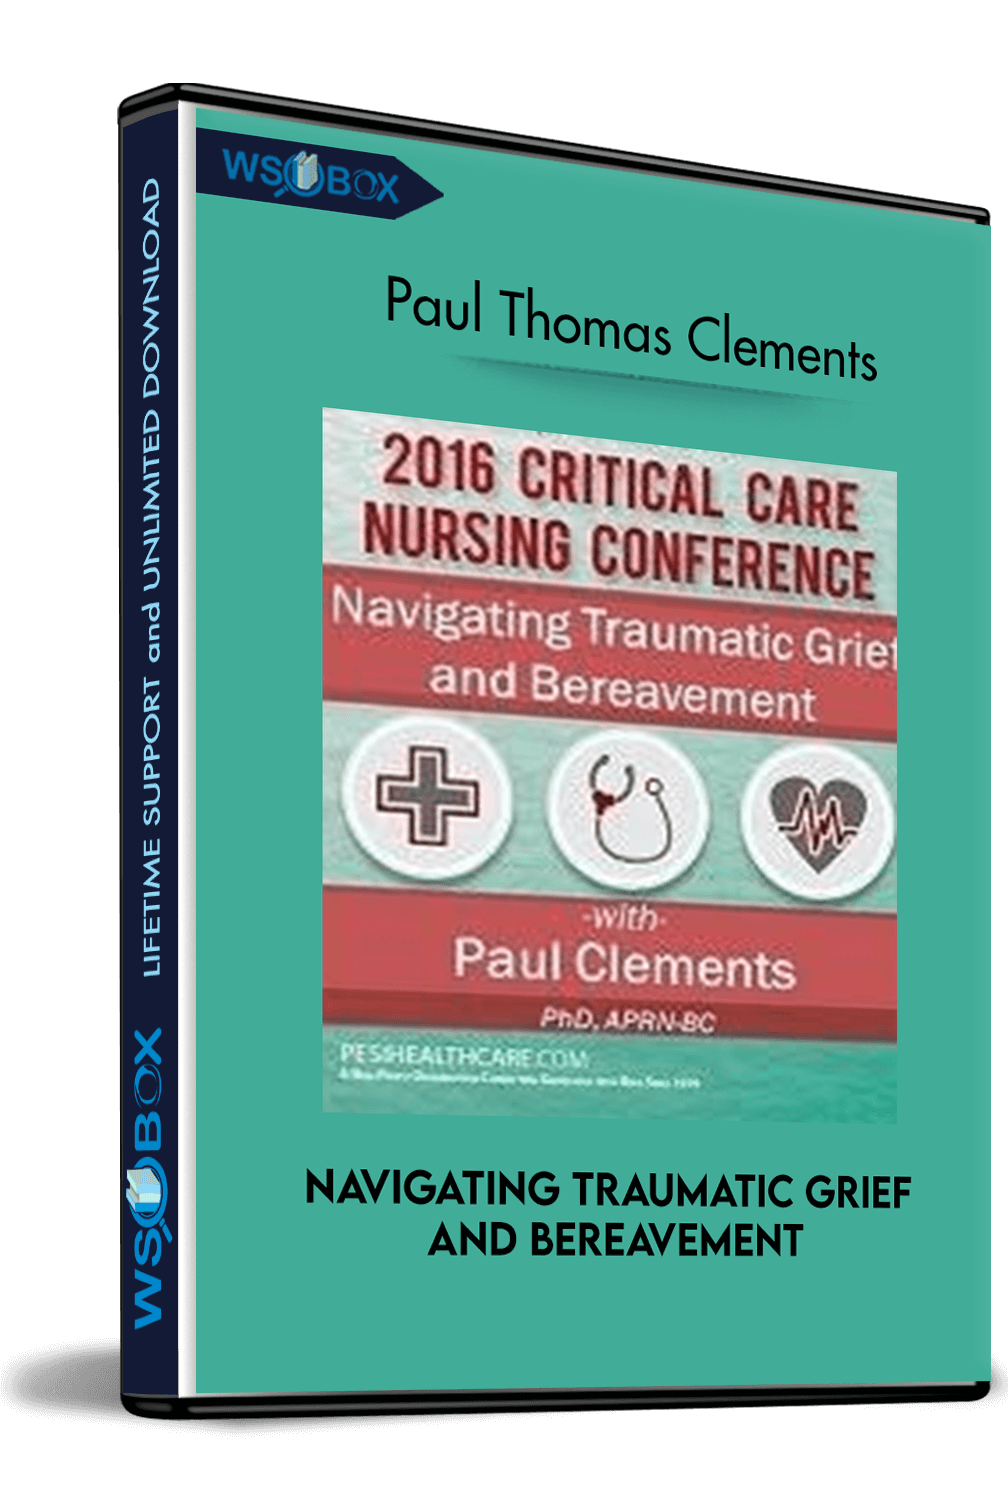 navigating-traumatic-grief-and-bereavement-paul-thomas-clements